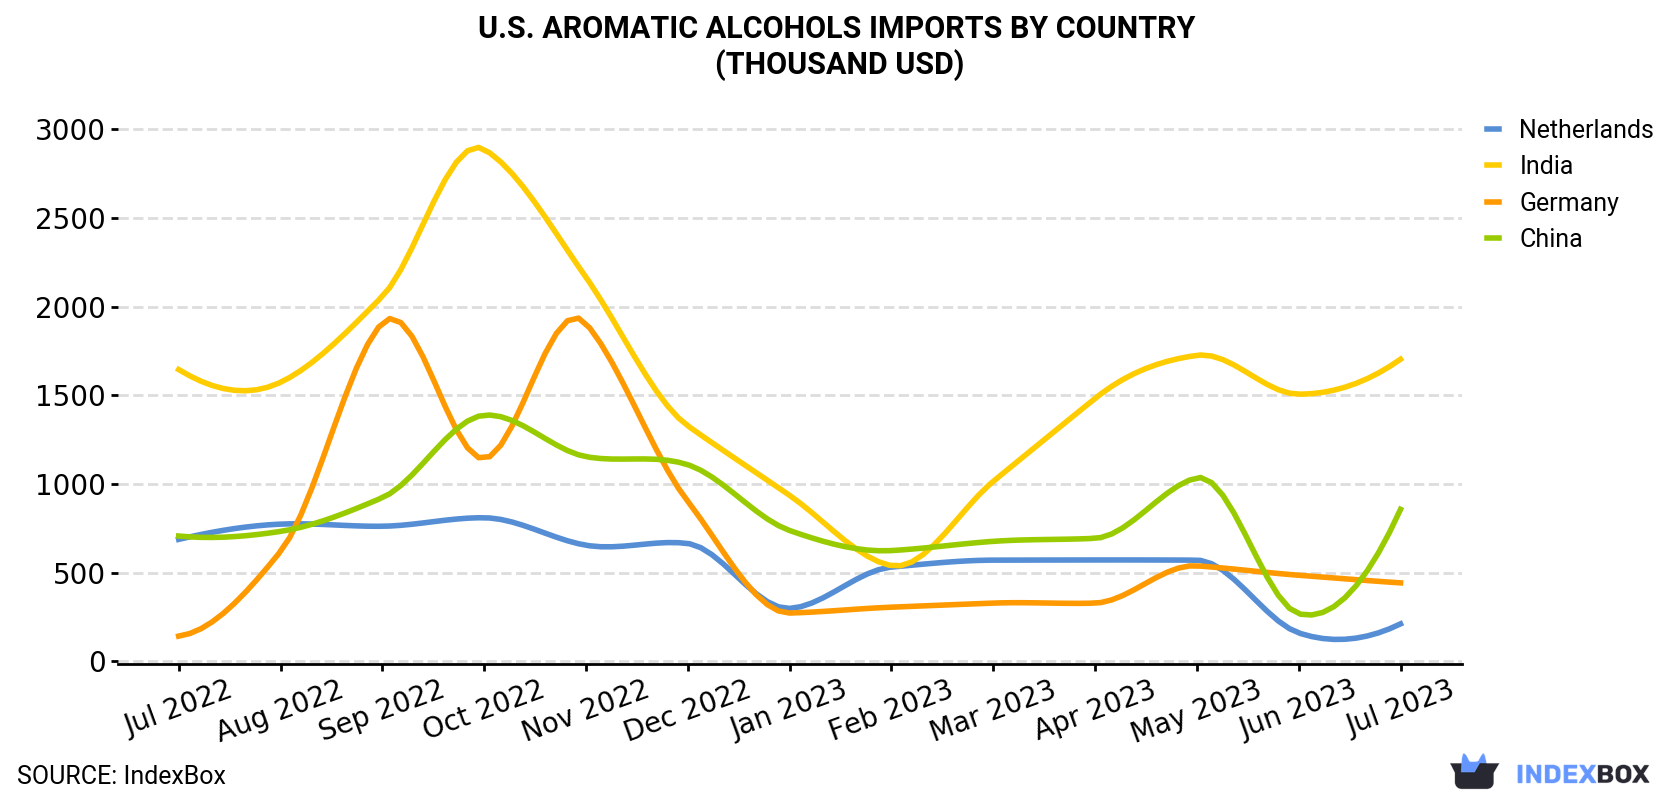 U.S. Aromatic Alcohols Imports By Country (Thousand USD)